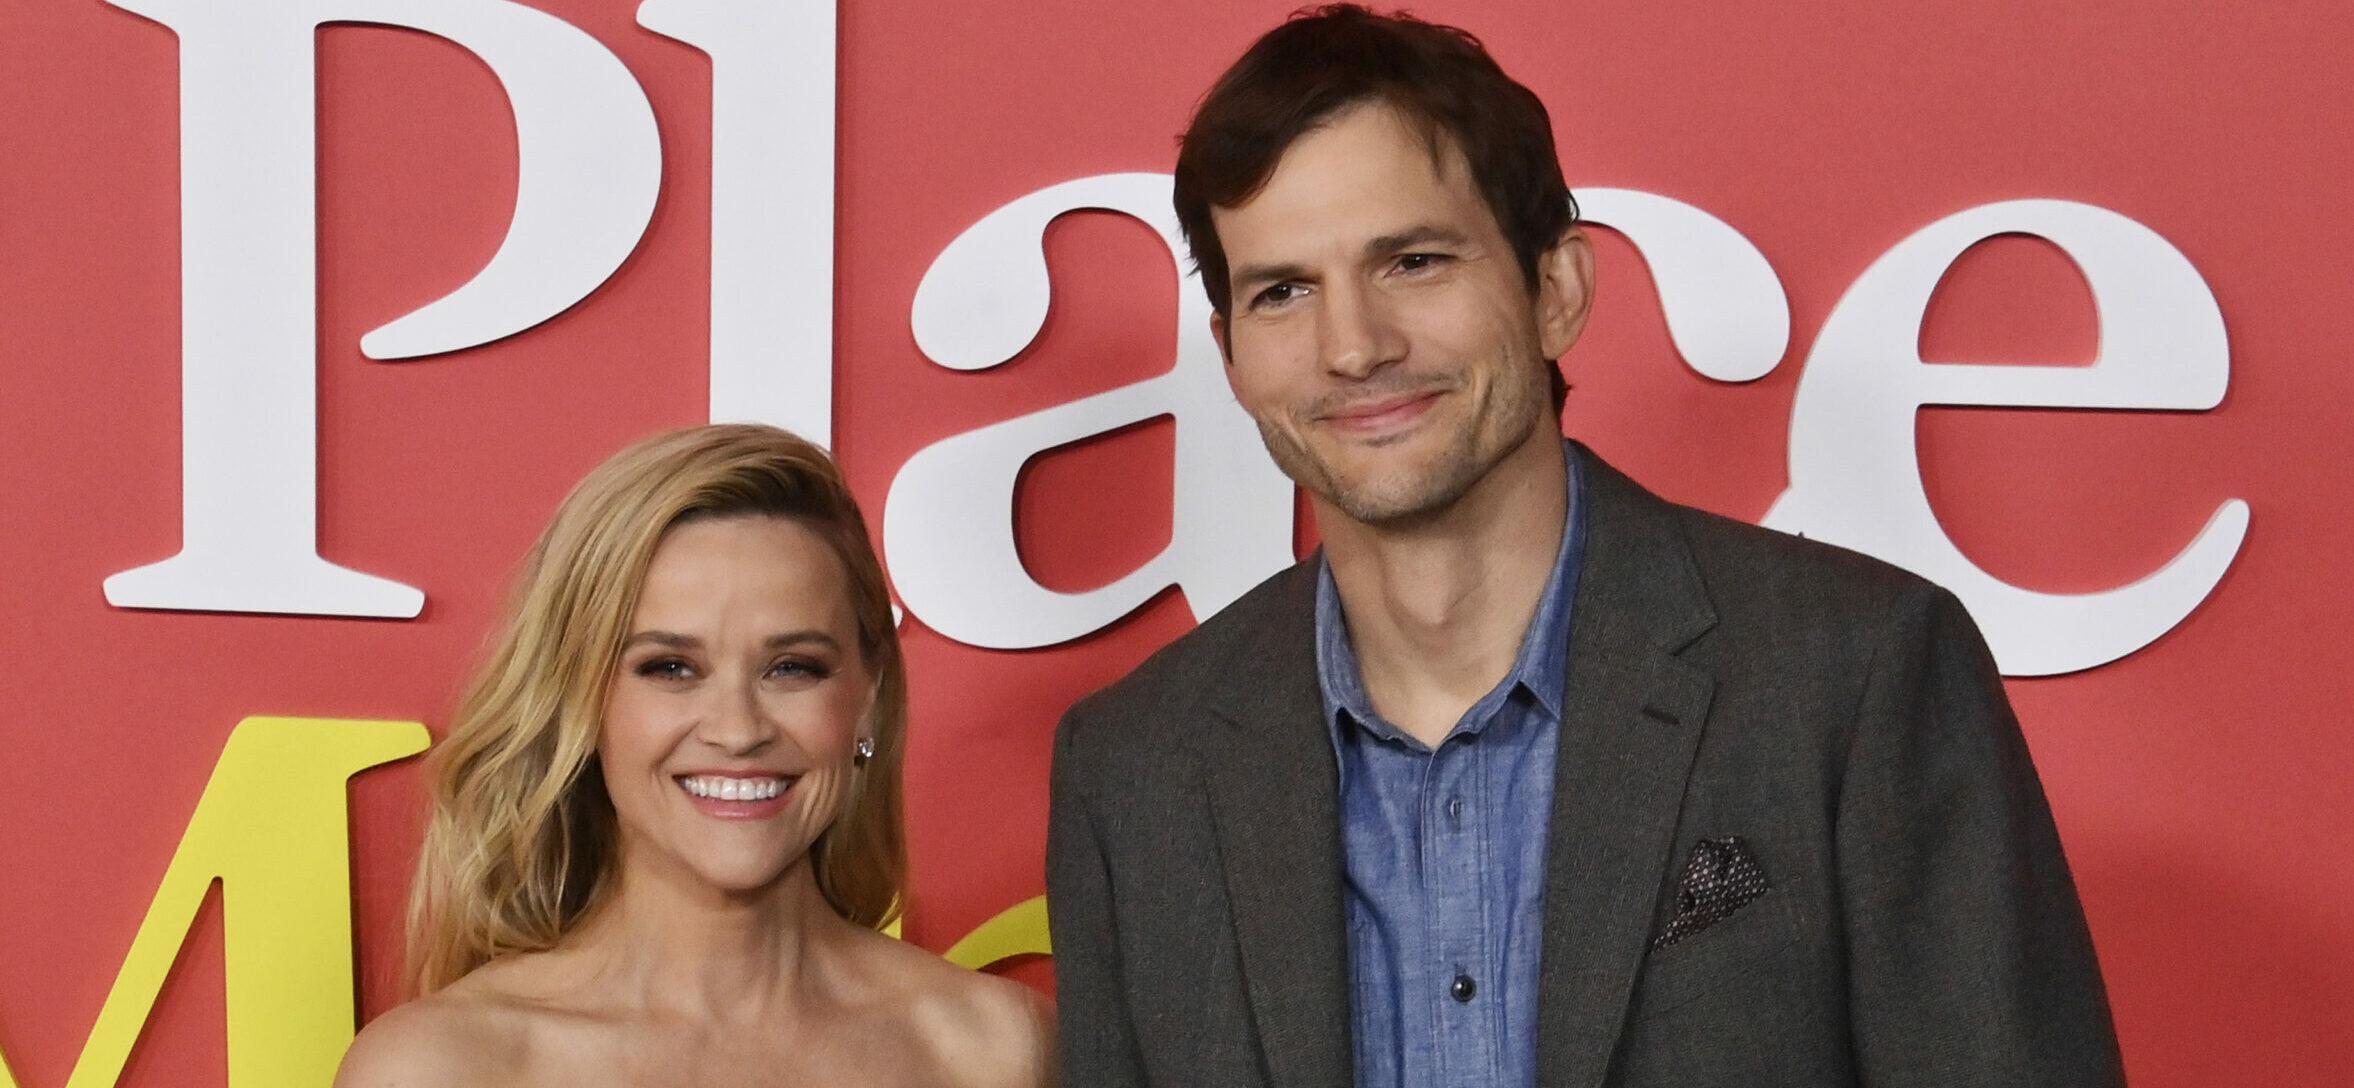 Ashton Kutcher Says He And Reese Witherspoon Were Awkward At Film Premiere To Avoid Affair Rumors